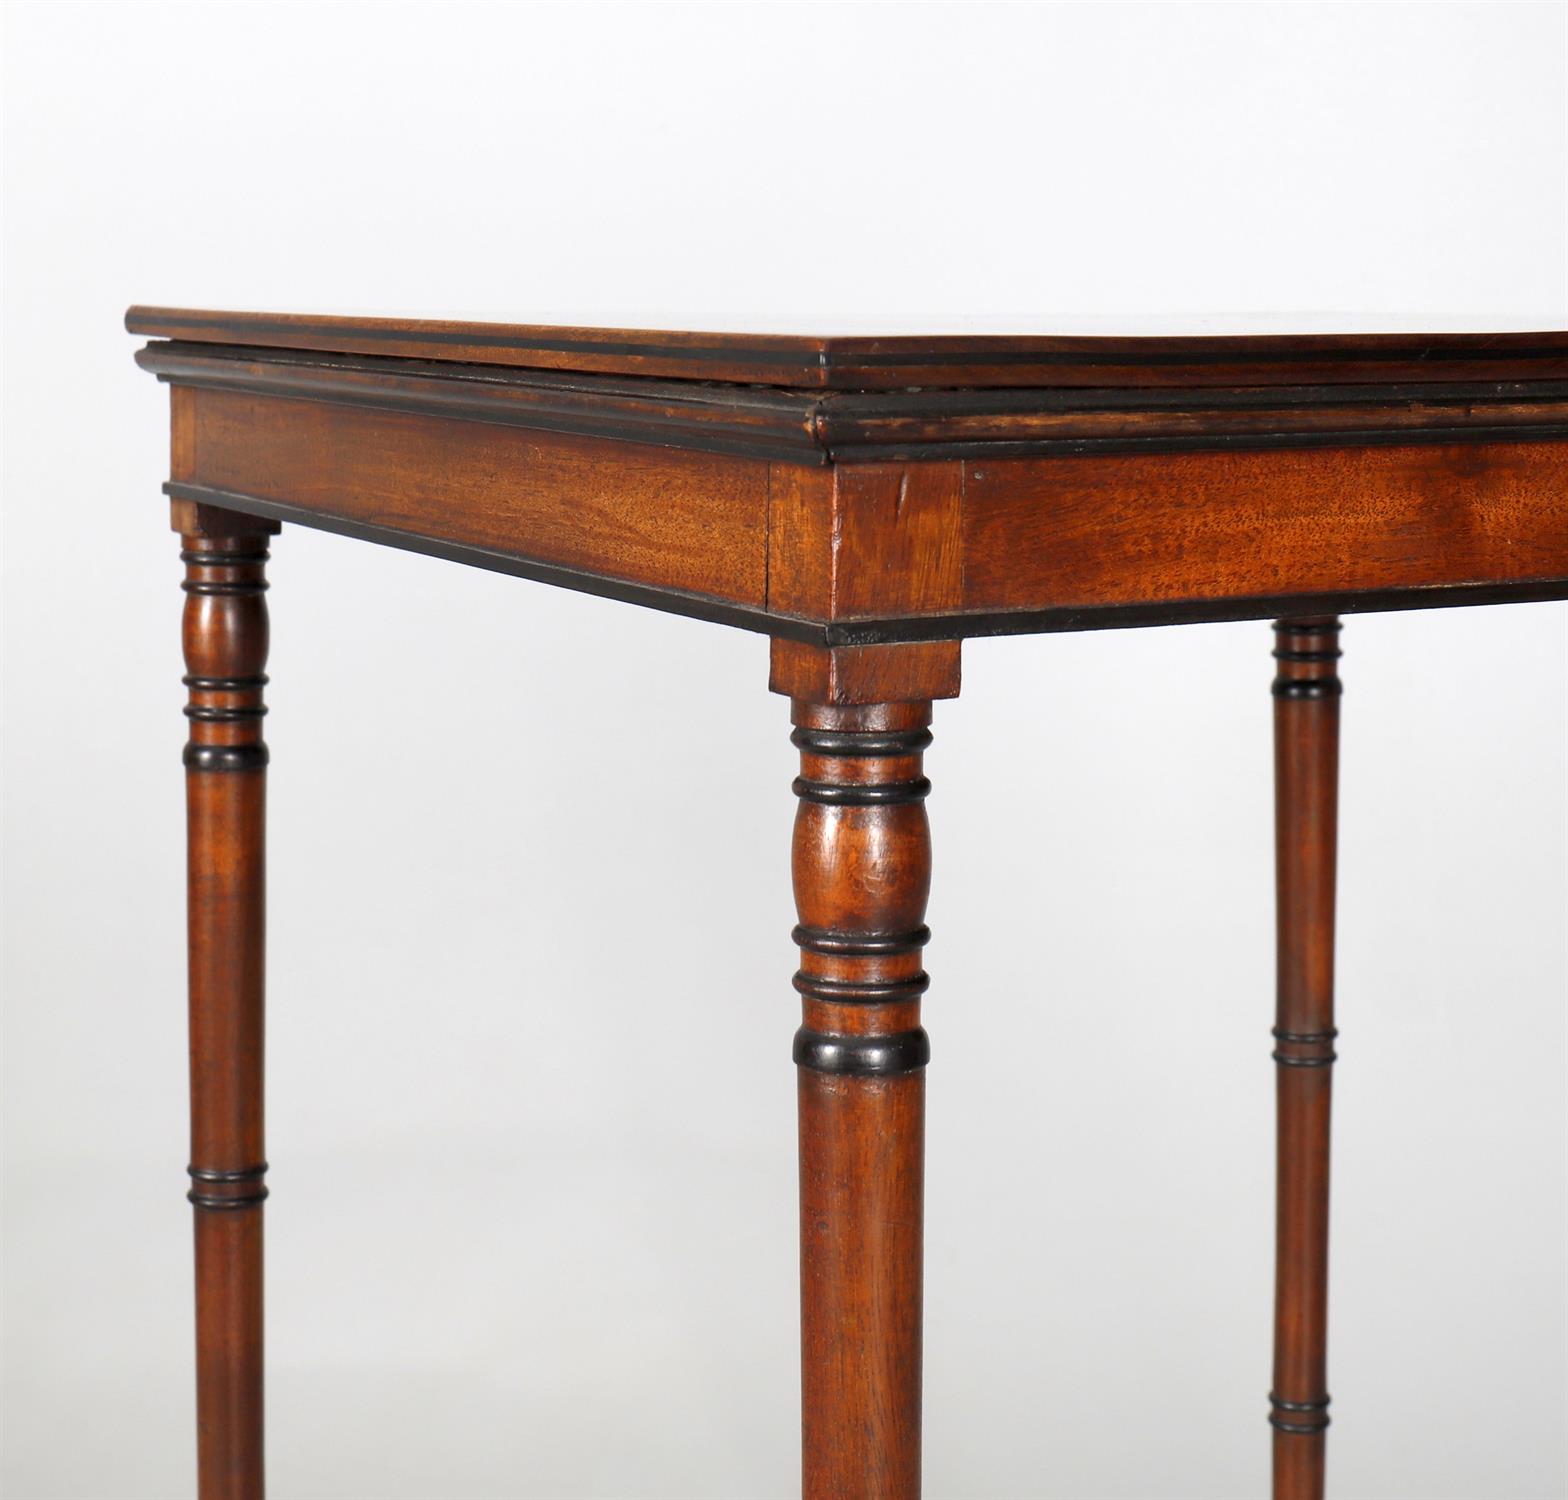 A George III mahogany and ebonised urn table in the manner of Alexander Peter - Image 4 of 6